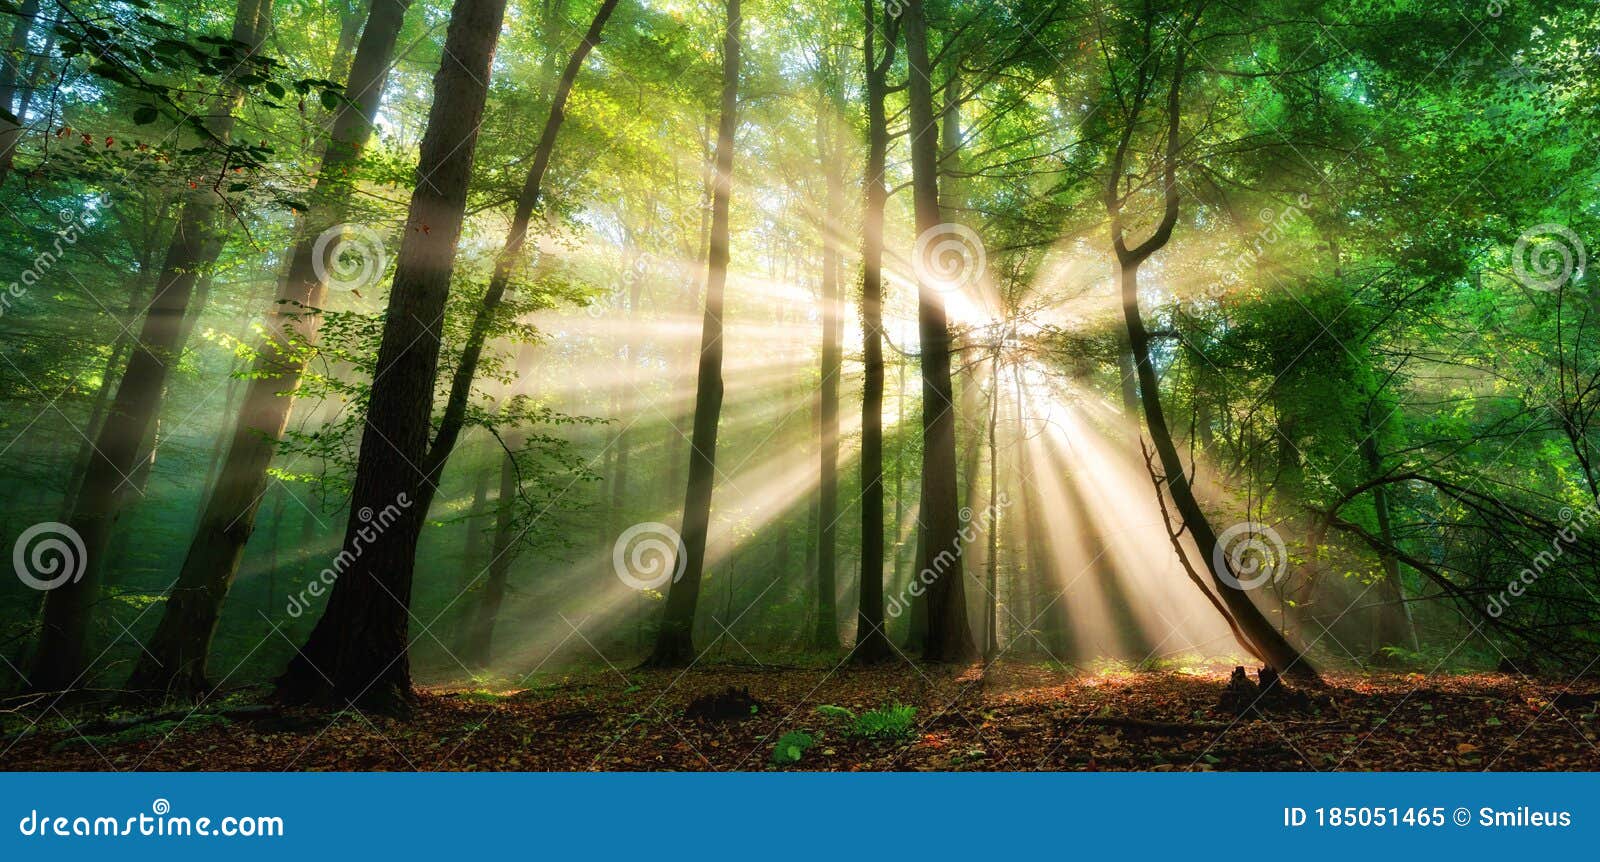 luminous rays of sunlight in a misty green forest